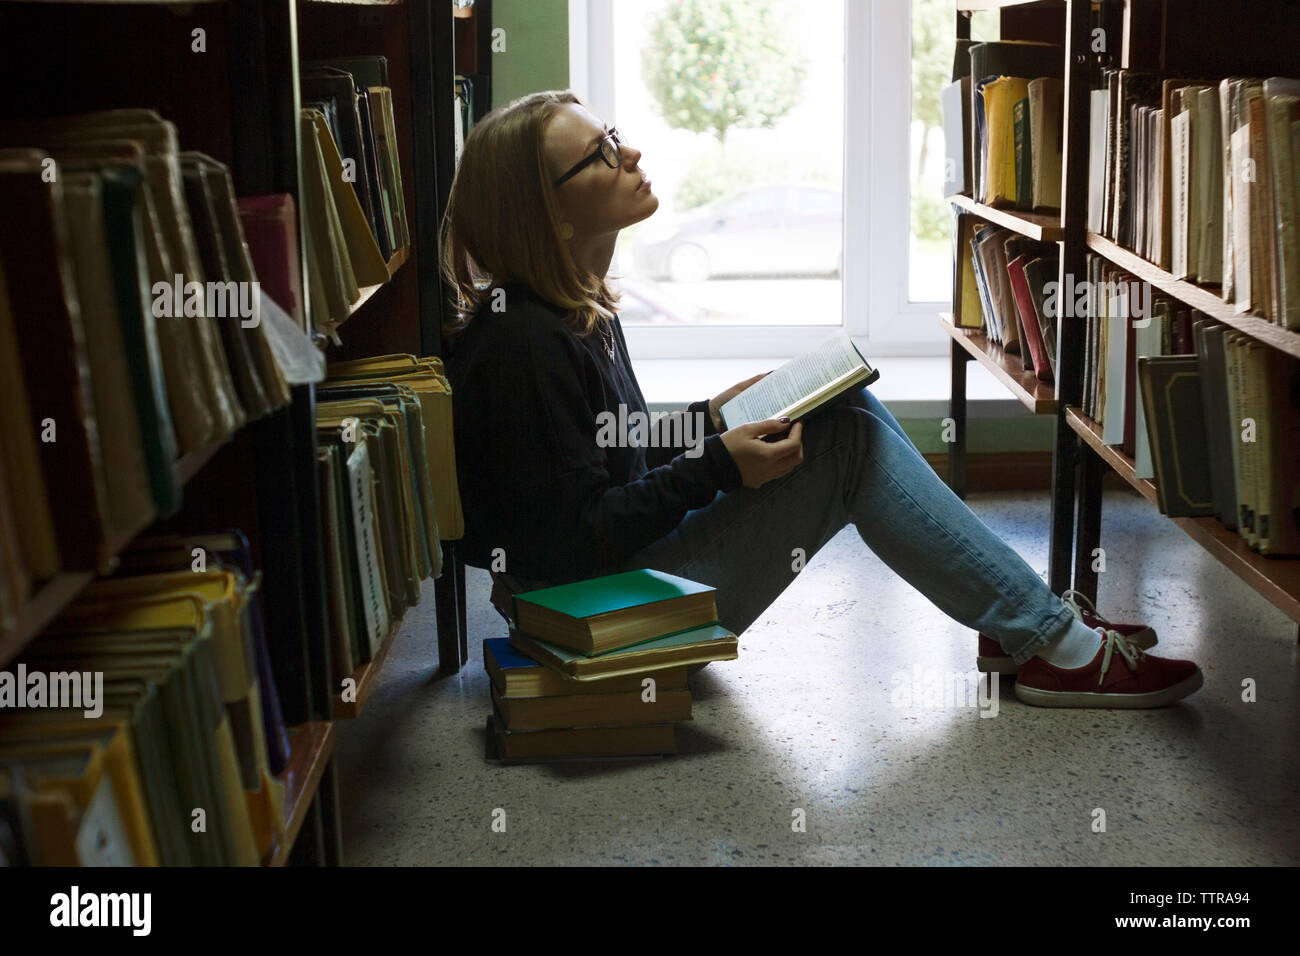 Woman holding book and looking up while sitting in library Stock Photo